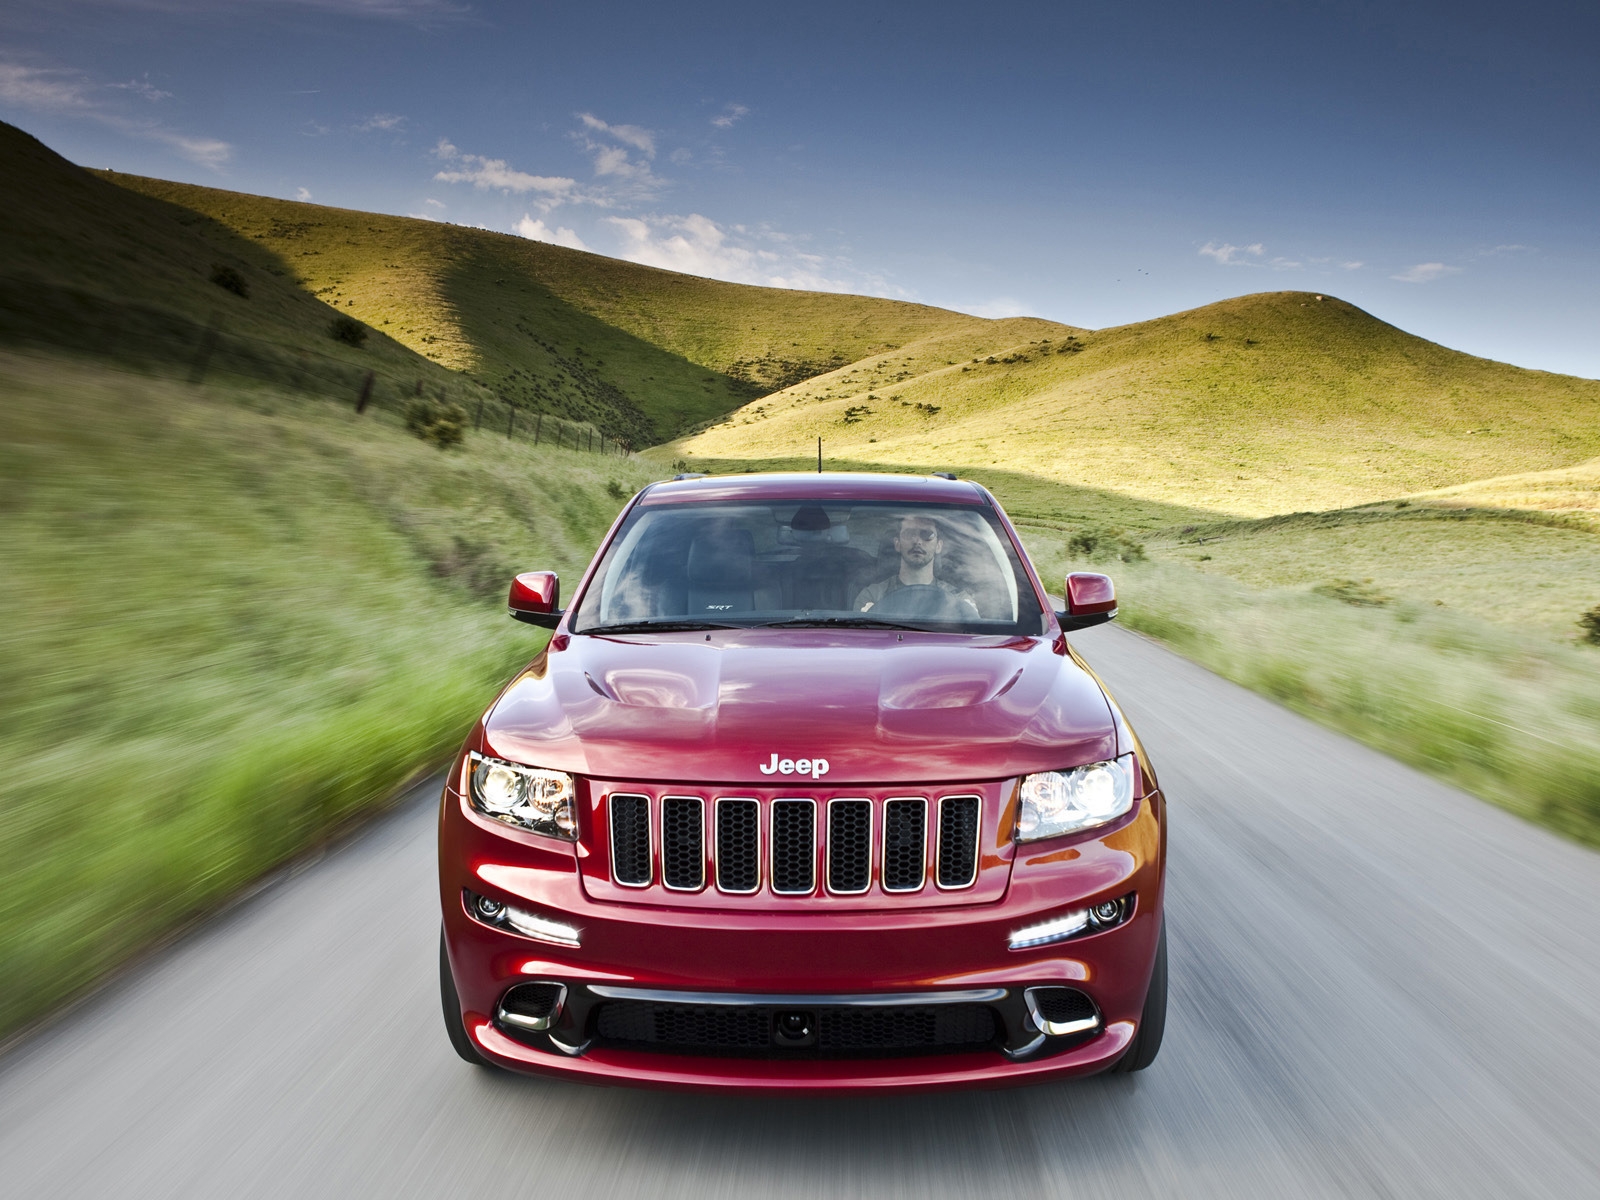 Jeep Grand Cherokee SRT8 2012 for 1600 x 1200 resolution